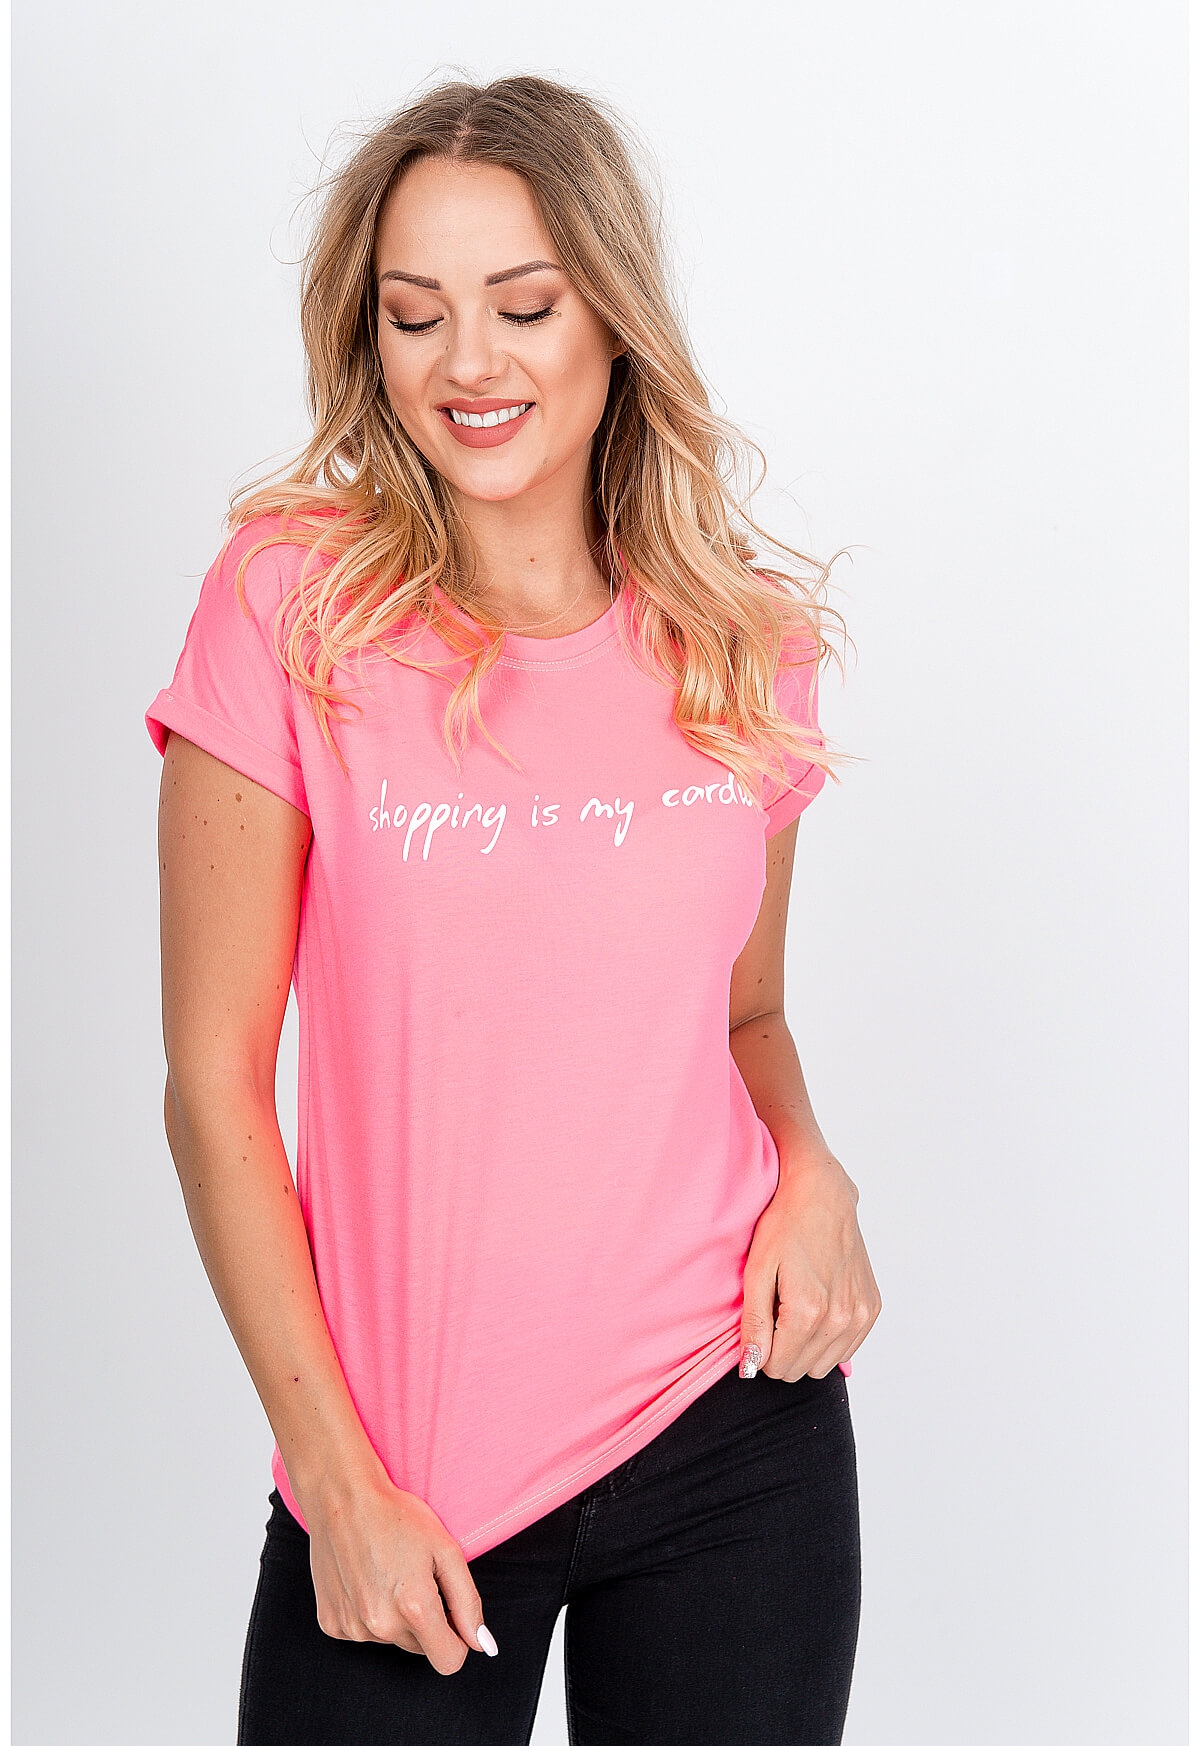 Women's T-shirt with the inscription "Shopping is my cardio" - pink,